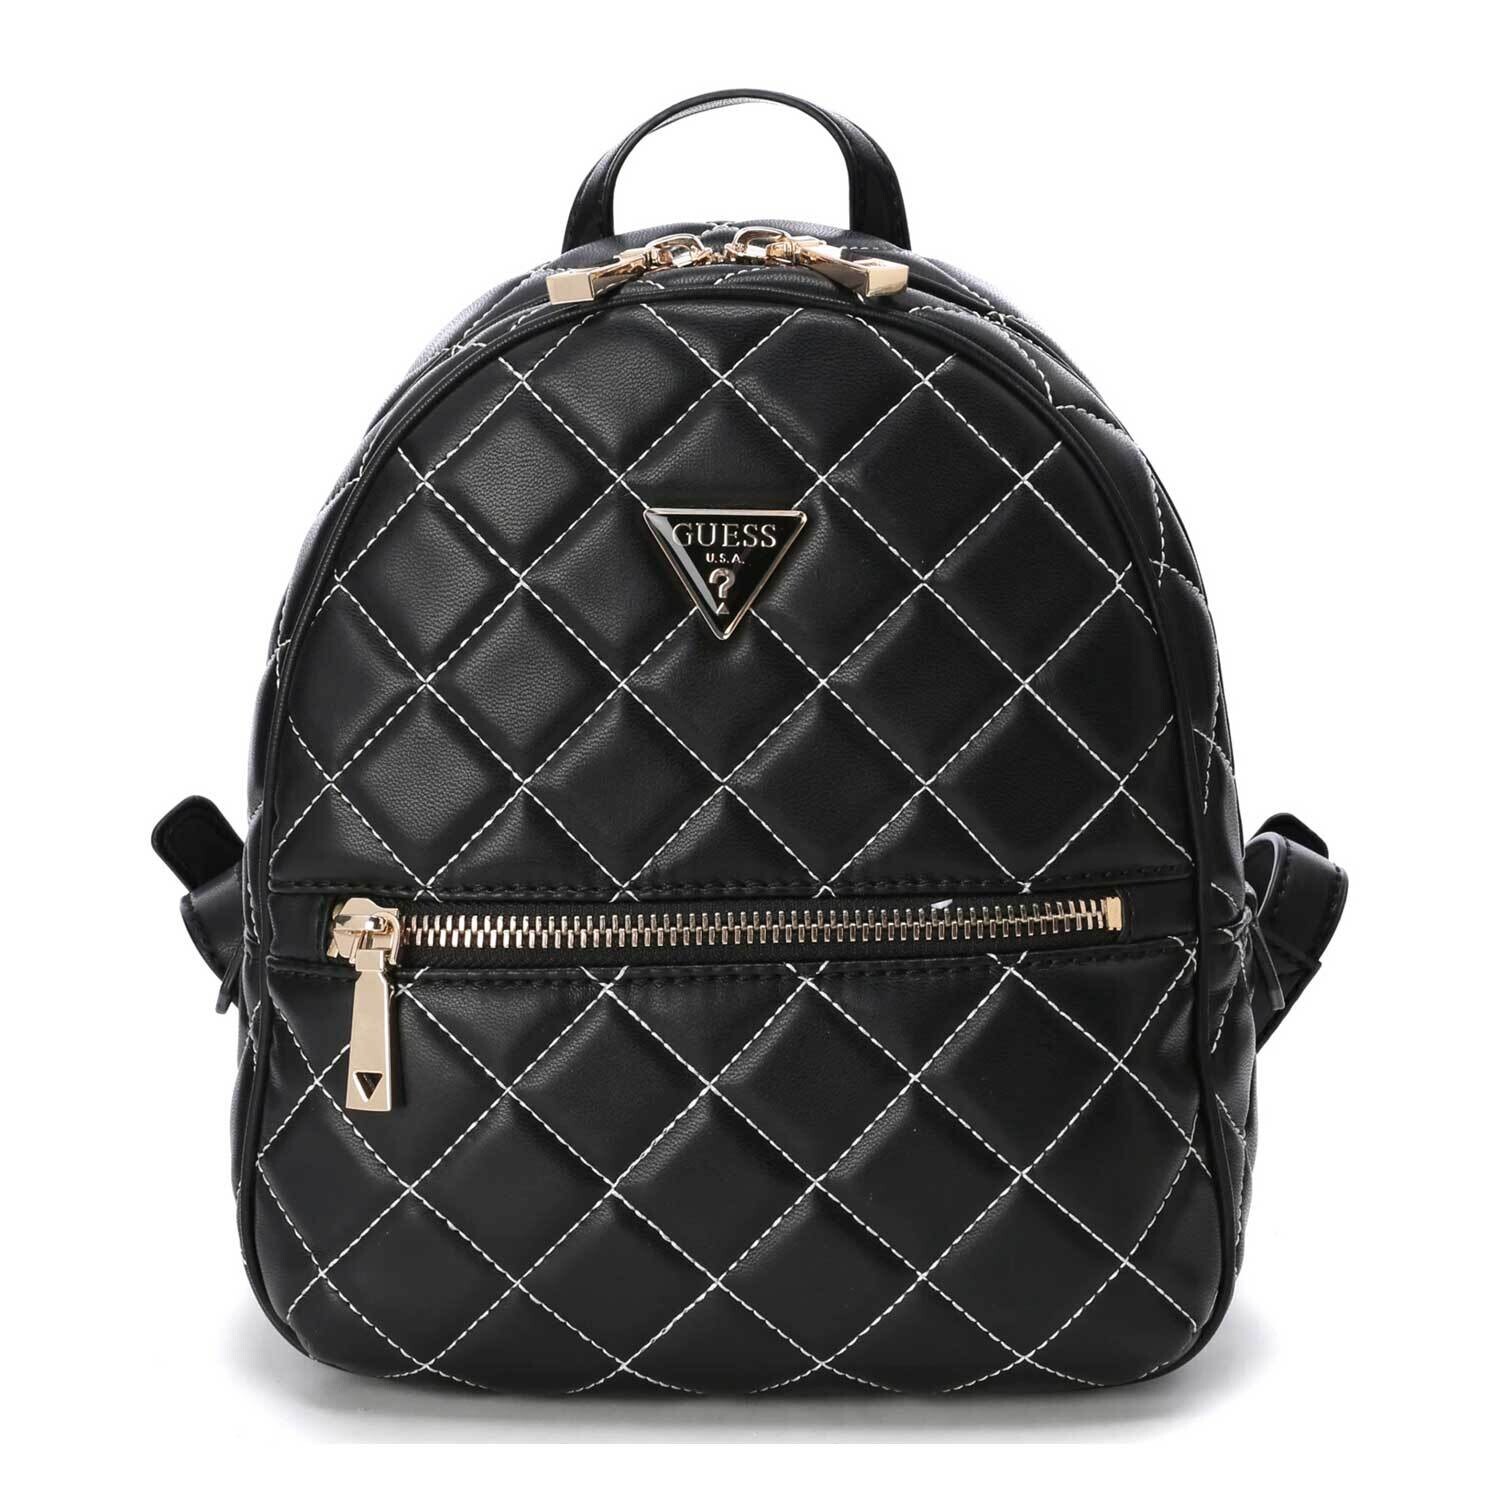 GUESS BACKPACK CESSILY / COLOR BLACK